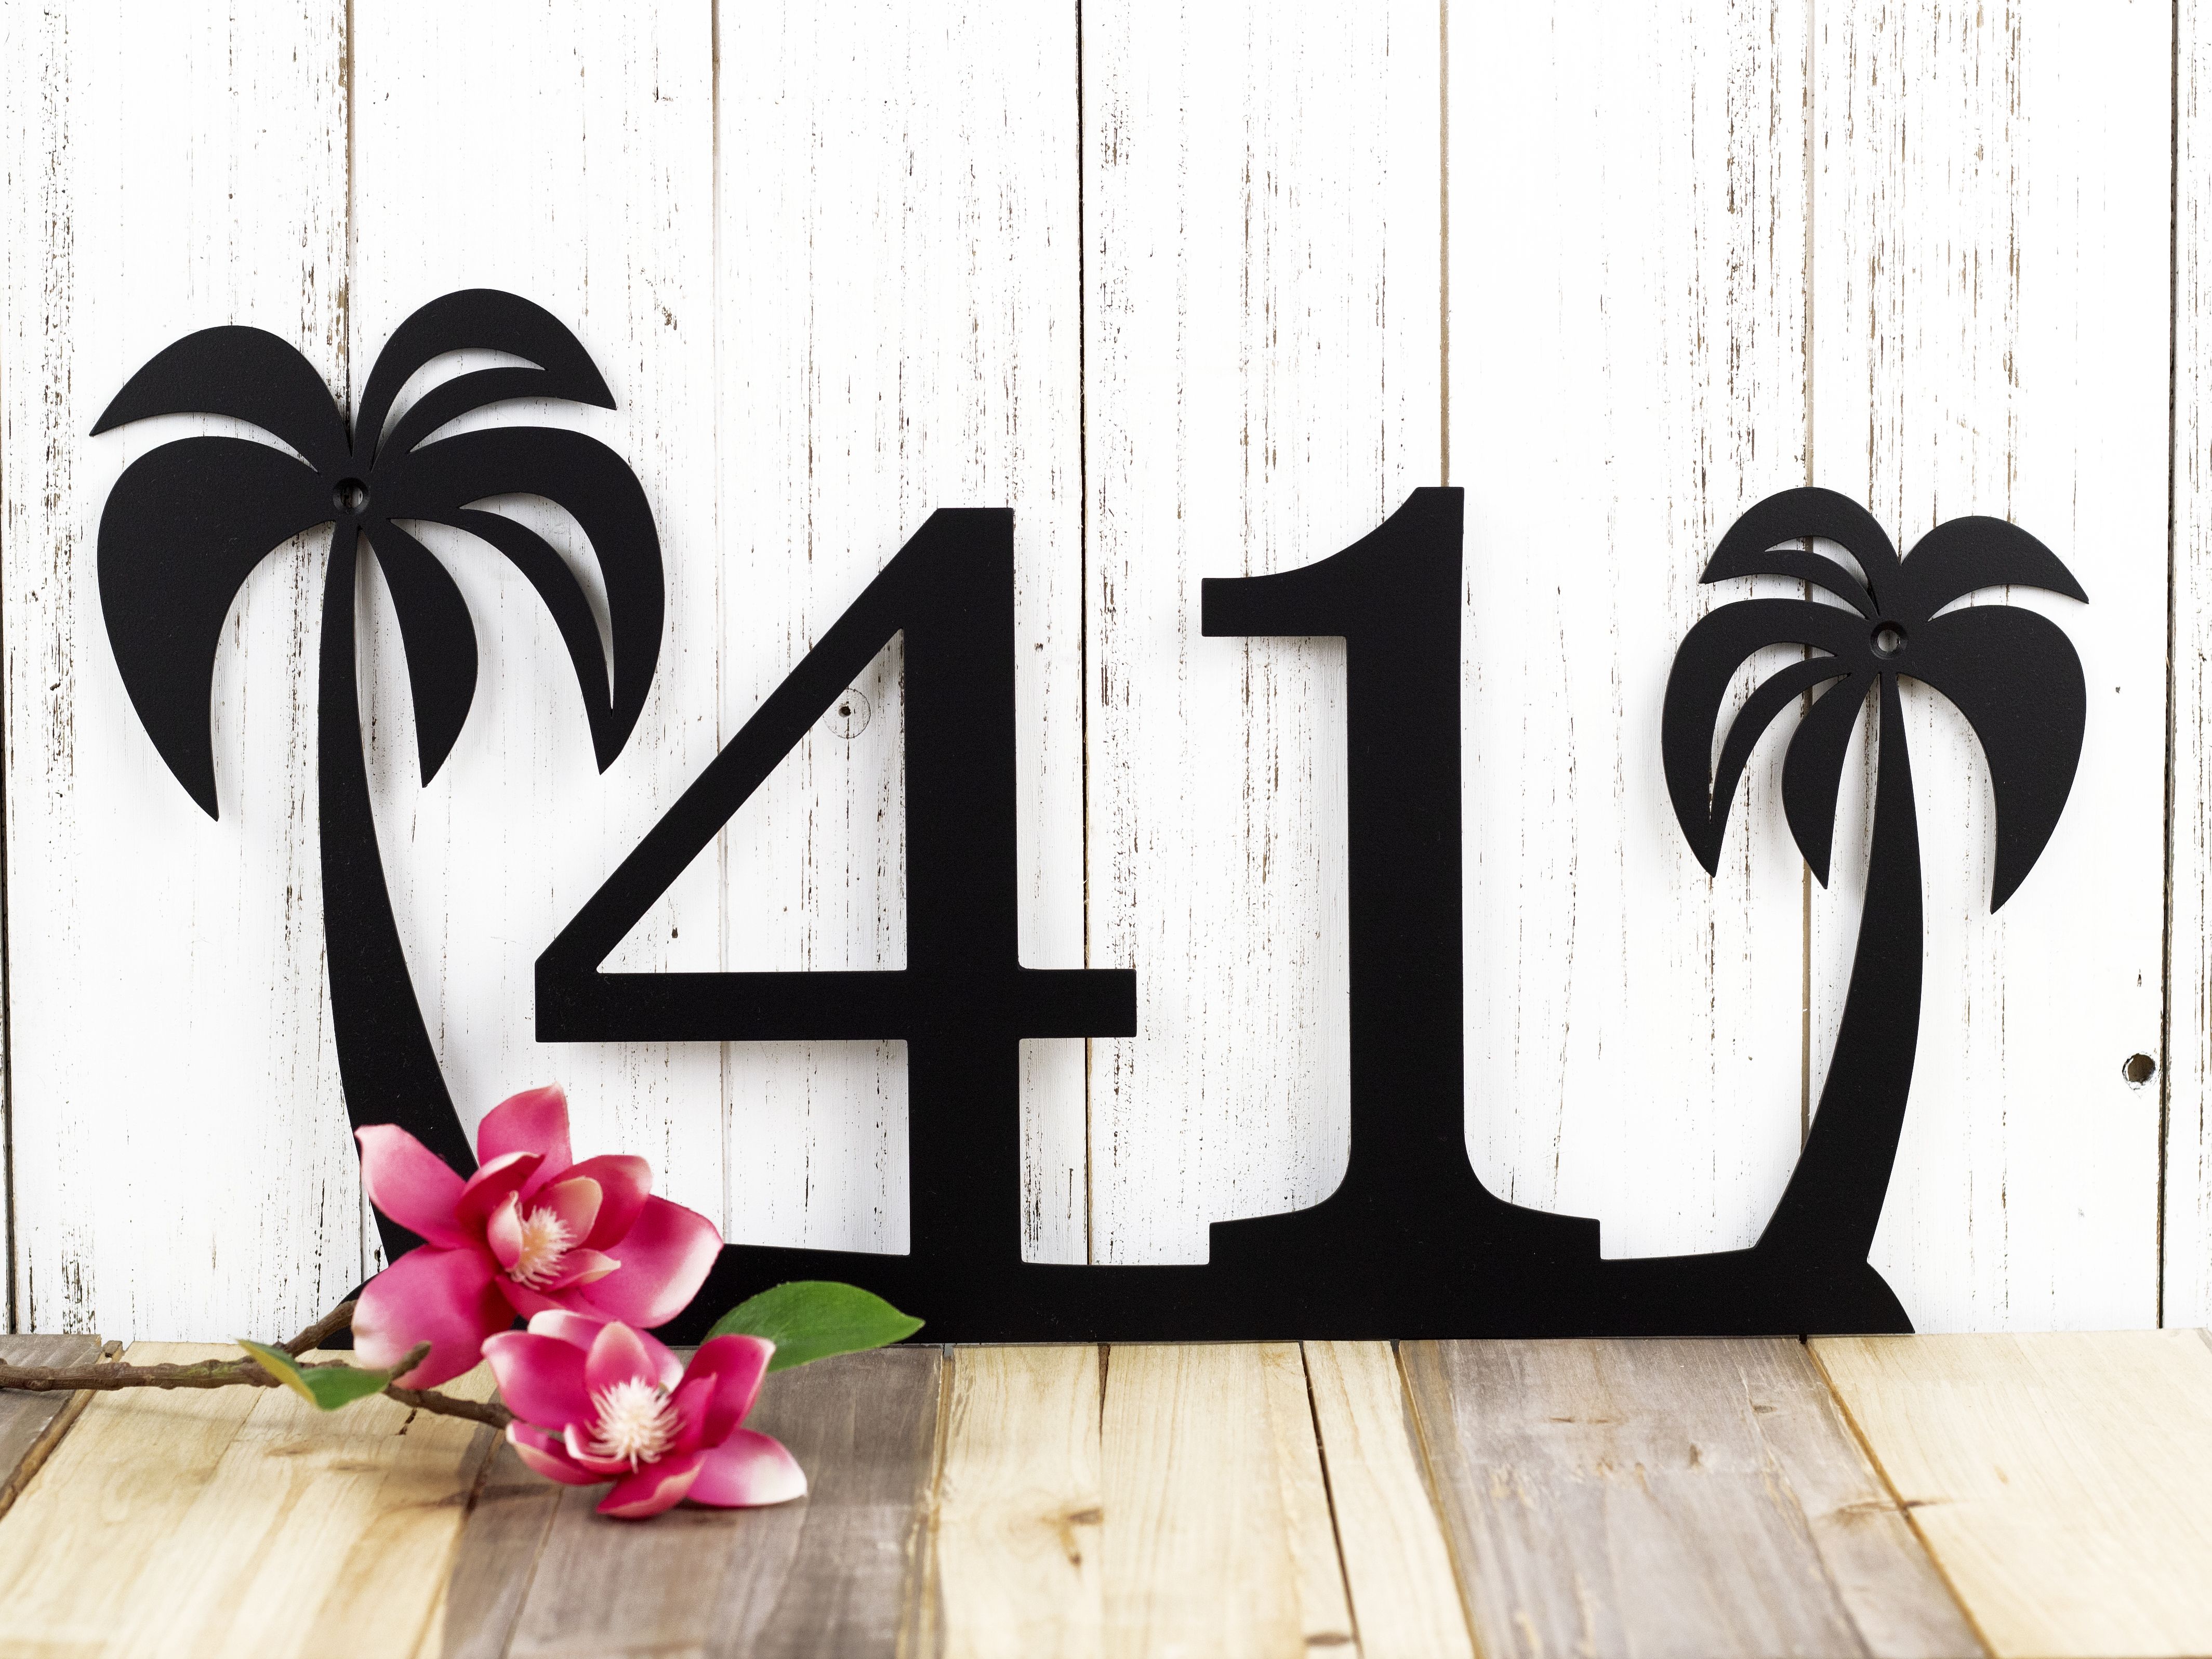 Details about   Personalized Palm Trees House Number Address Black Metal Sign